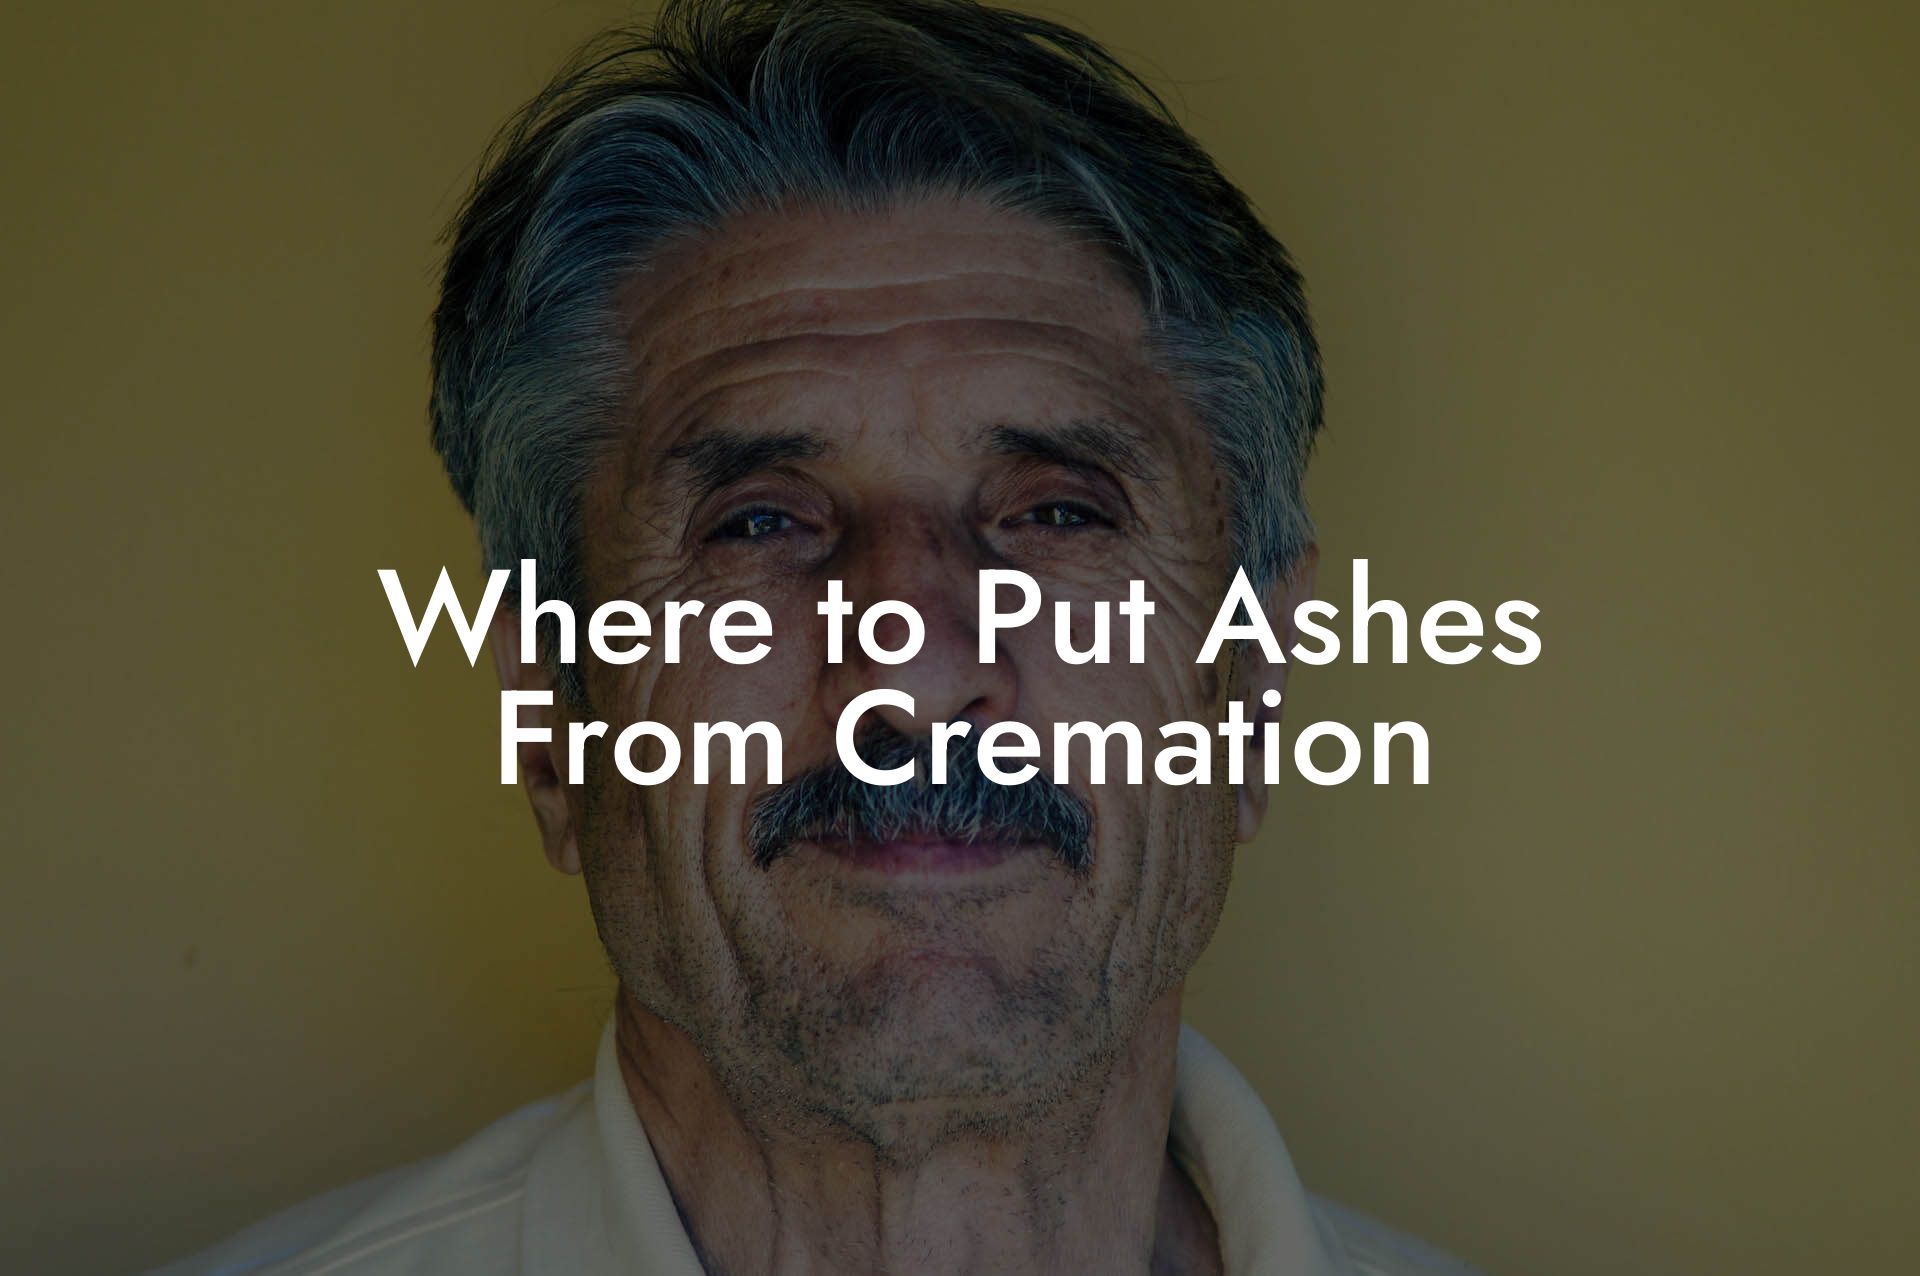 Where to Put Ashes From Cremation